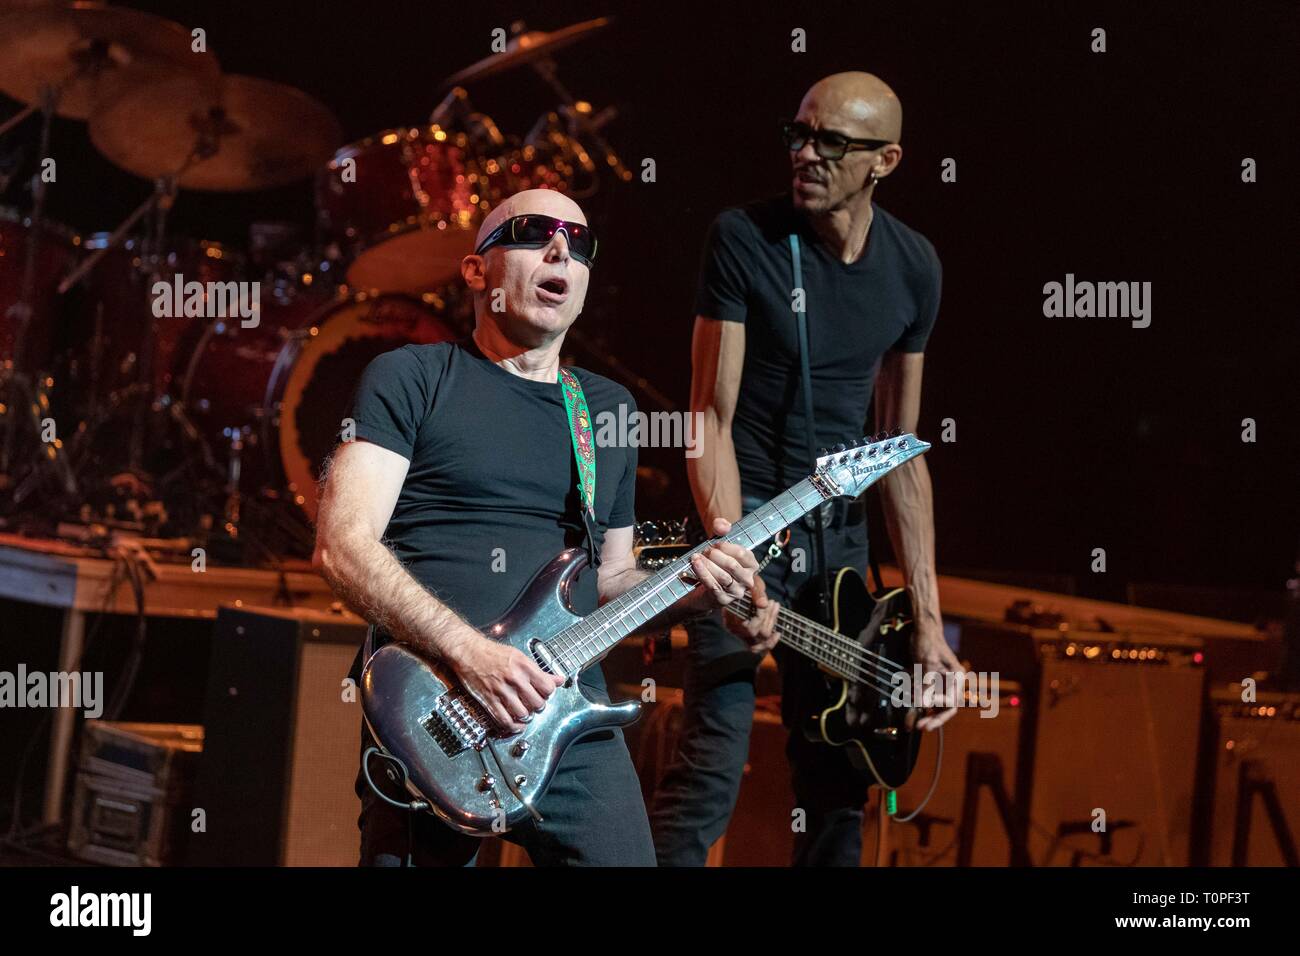 Madison, Wisconsin, USA. 20th Mar, 2019. JOE SATRIANI and DOUG PINNICK during the Experience Hendrix Tour at the Overture Center for the Arts in Madison, Wisconsin Credit: Daniel DeSlover/ZUMA Wire/Alamy Live News Stock Photo